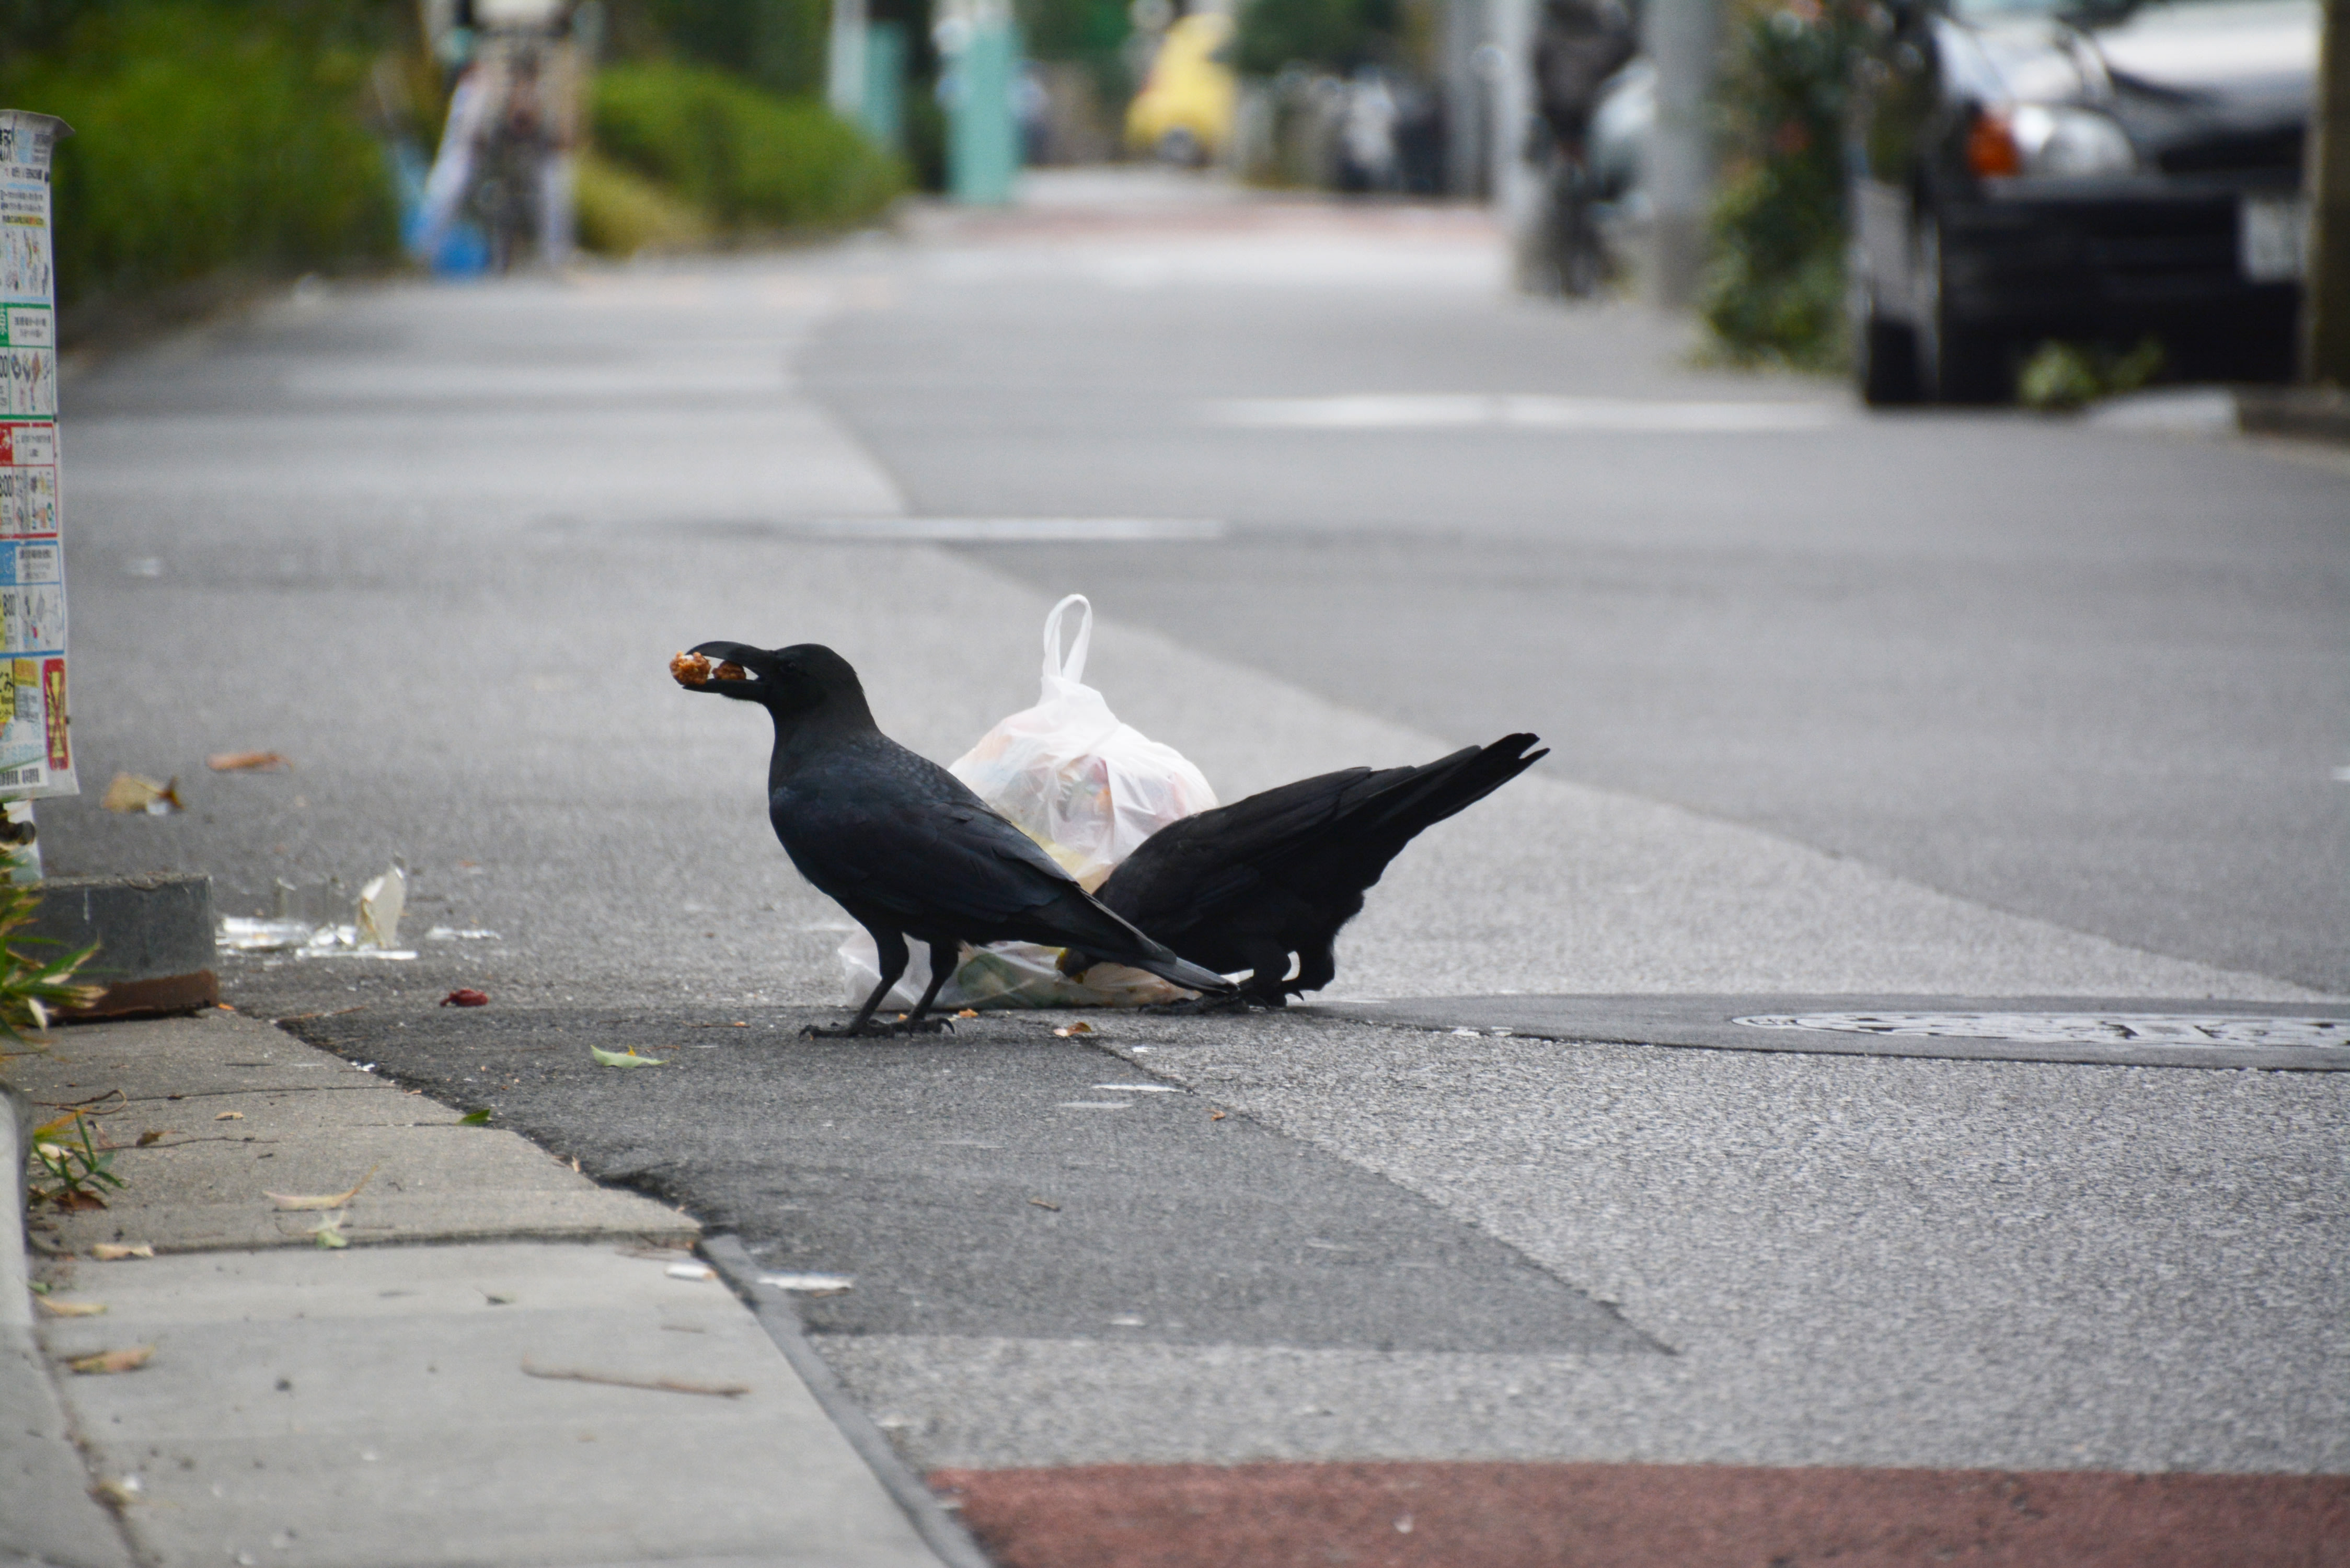 Two Japanese crows tear open a garbage bag, eating whatever trash they can that is inside. One of them has food waste in its beak.